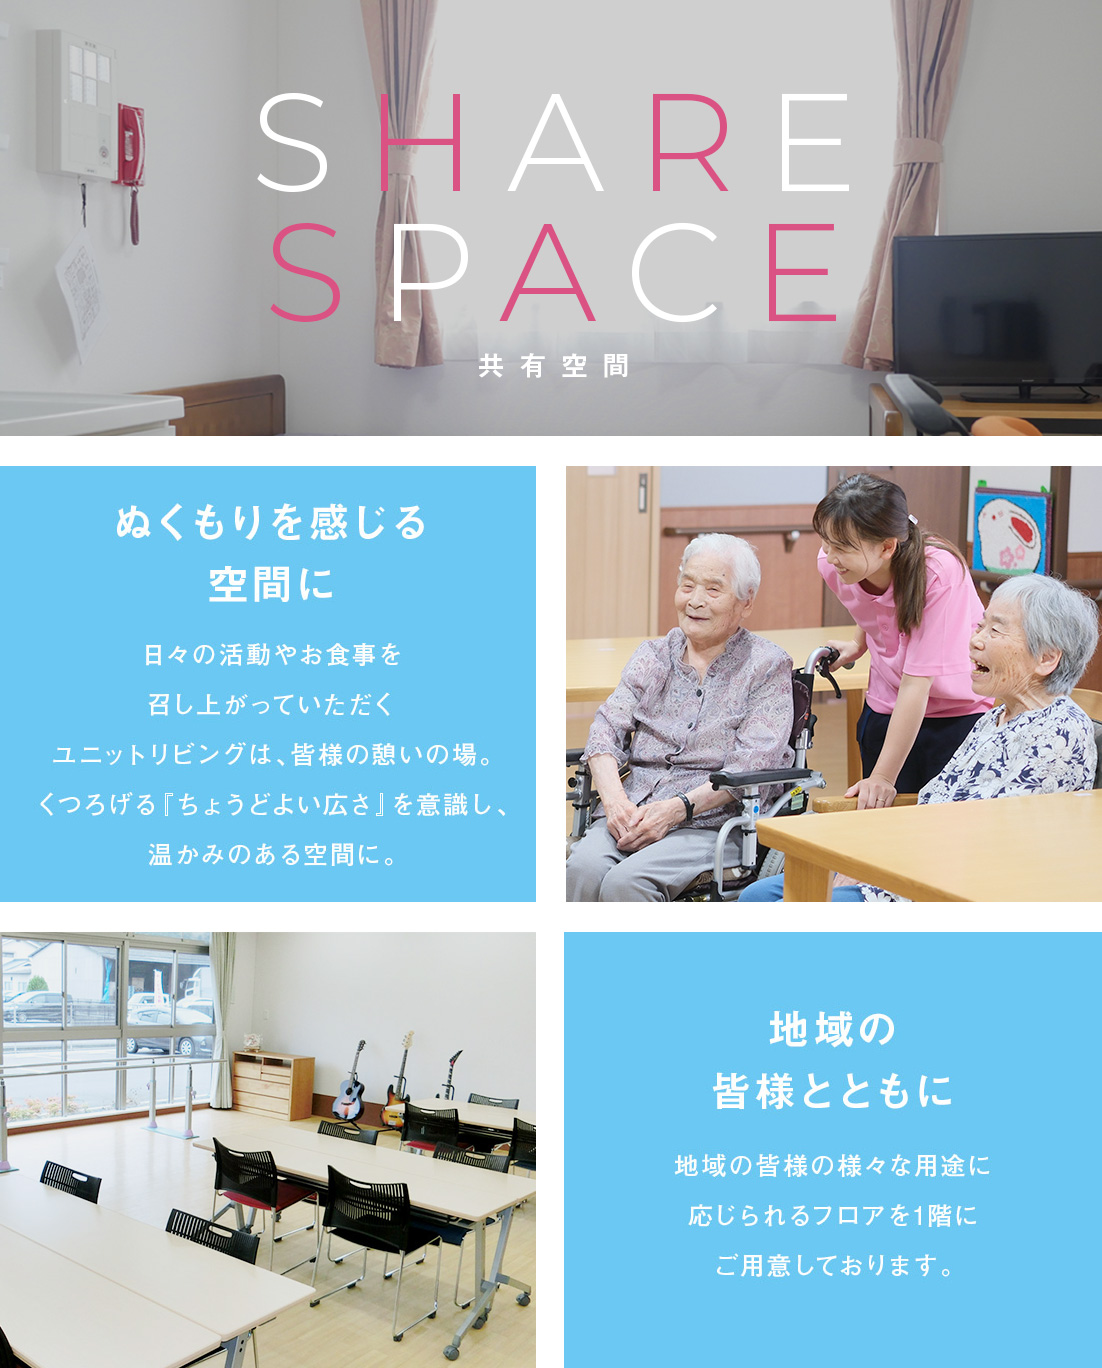 SHARE SPACE